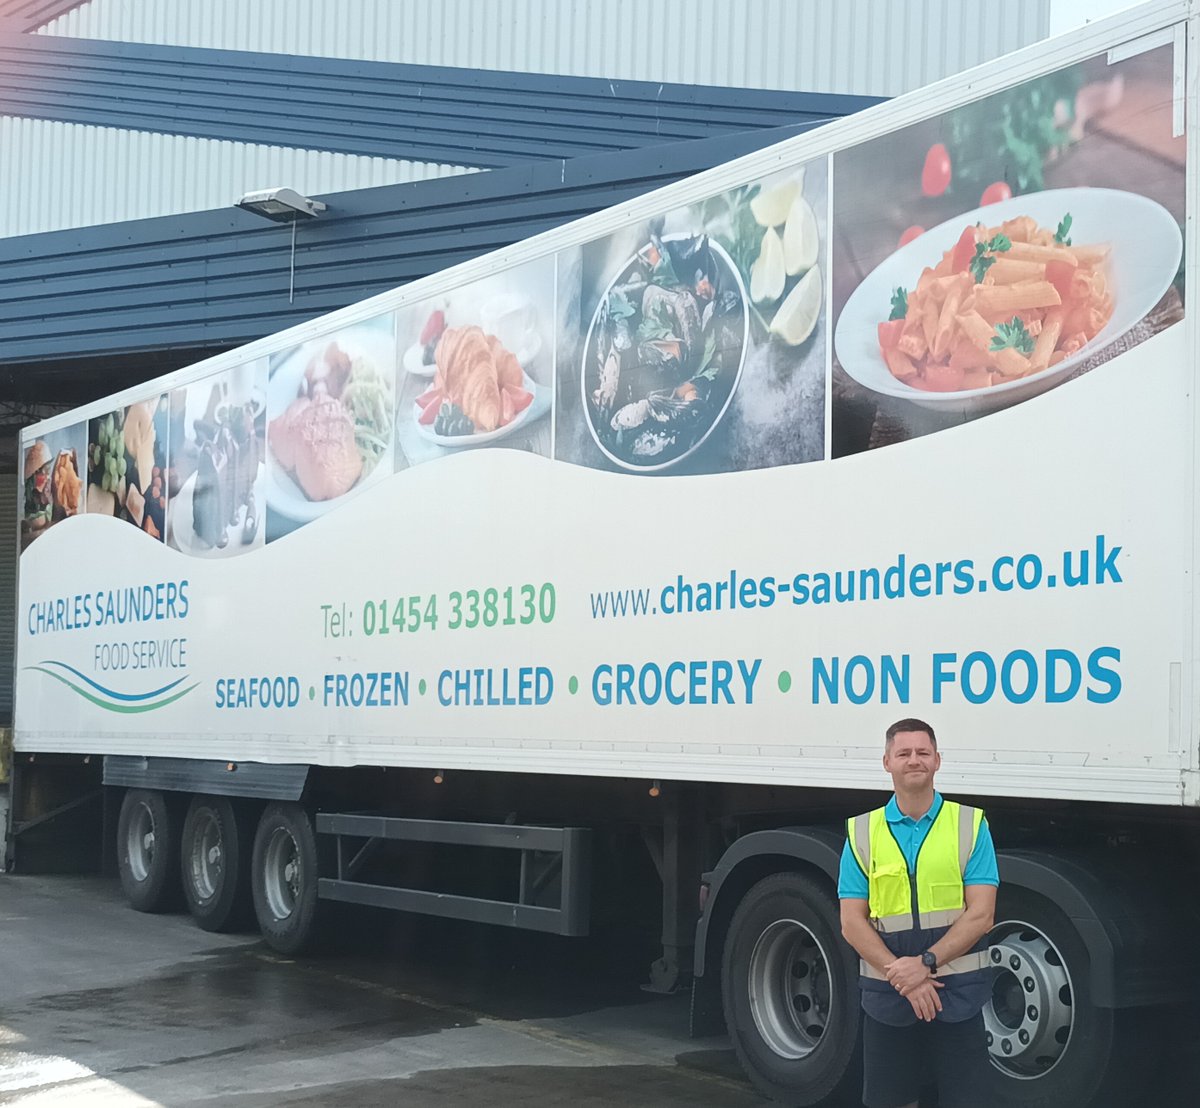 Victoria Foods acquired by @fairwayfood member @CSfoodservice 
cashandcarrymanagement.co.uk/charles-saunde…